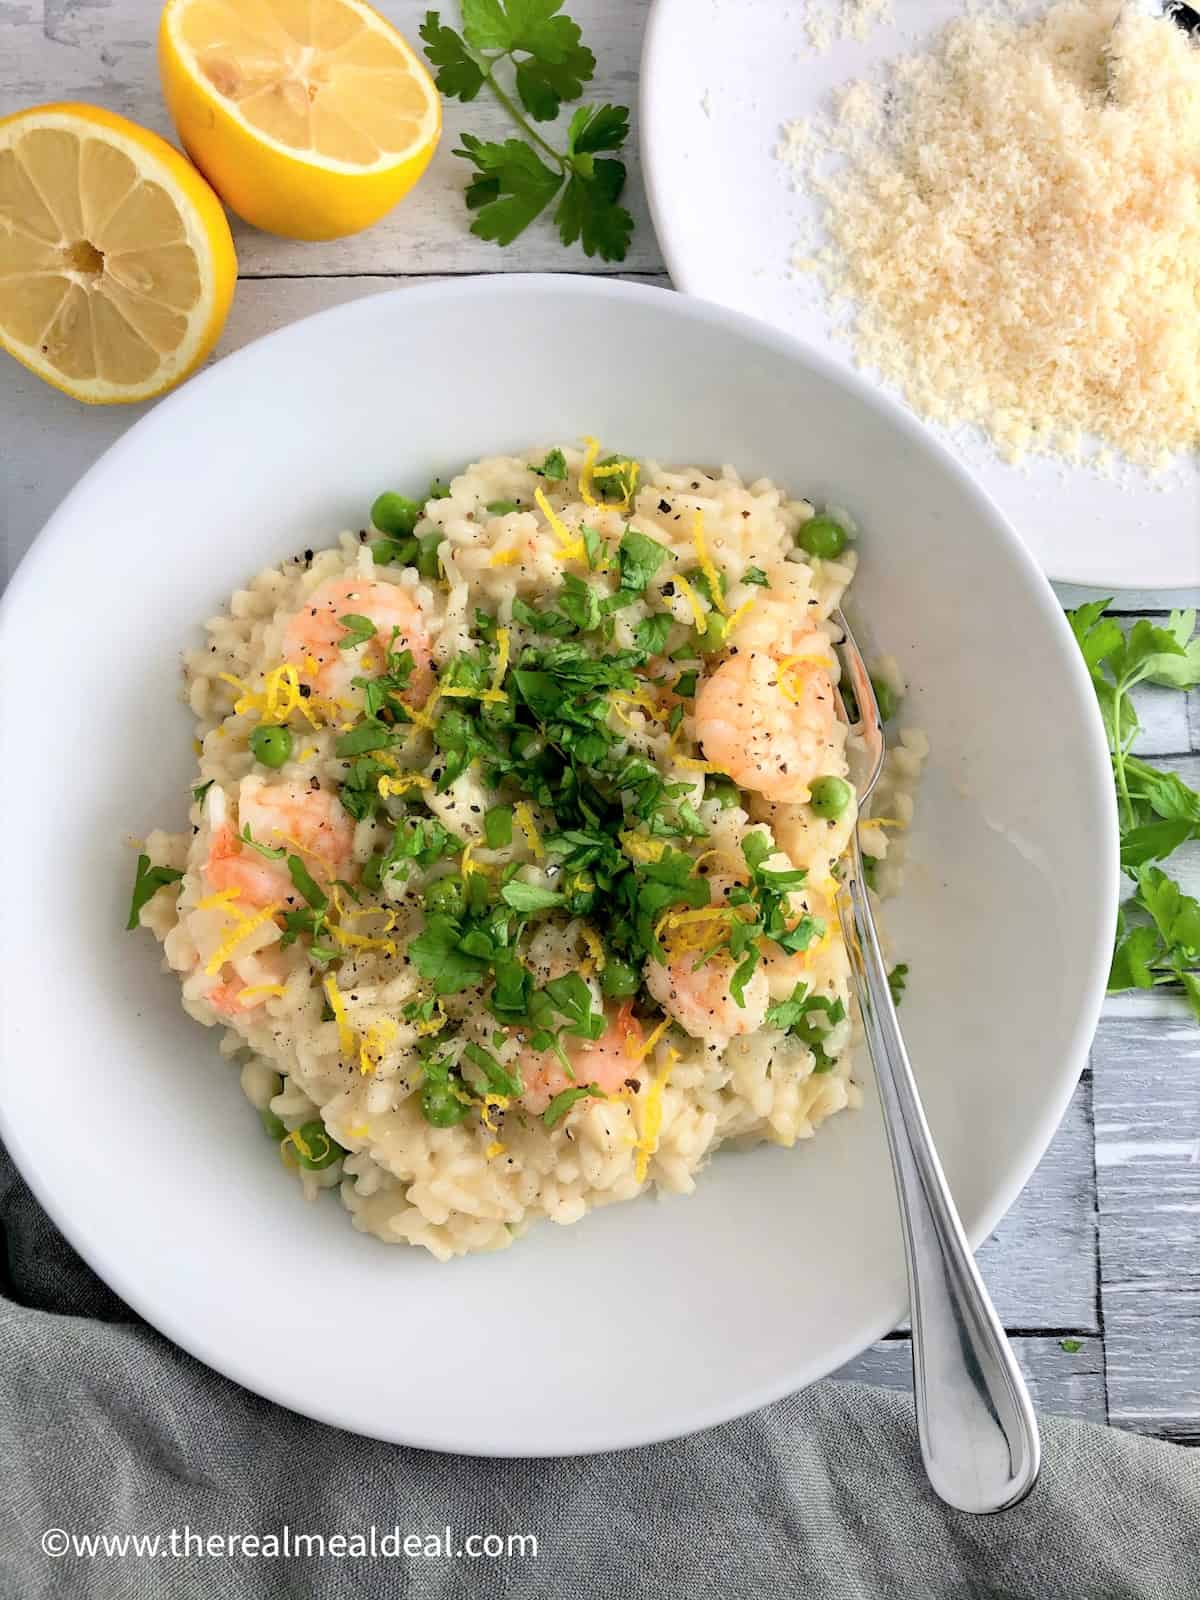 prawn and pea risotto in bowl topped with fresh parsley leaves lemon zest lemon halves parsley leaves and grated parmesan to side of dish